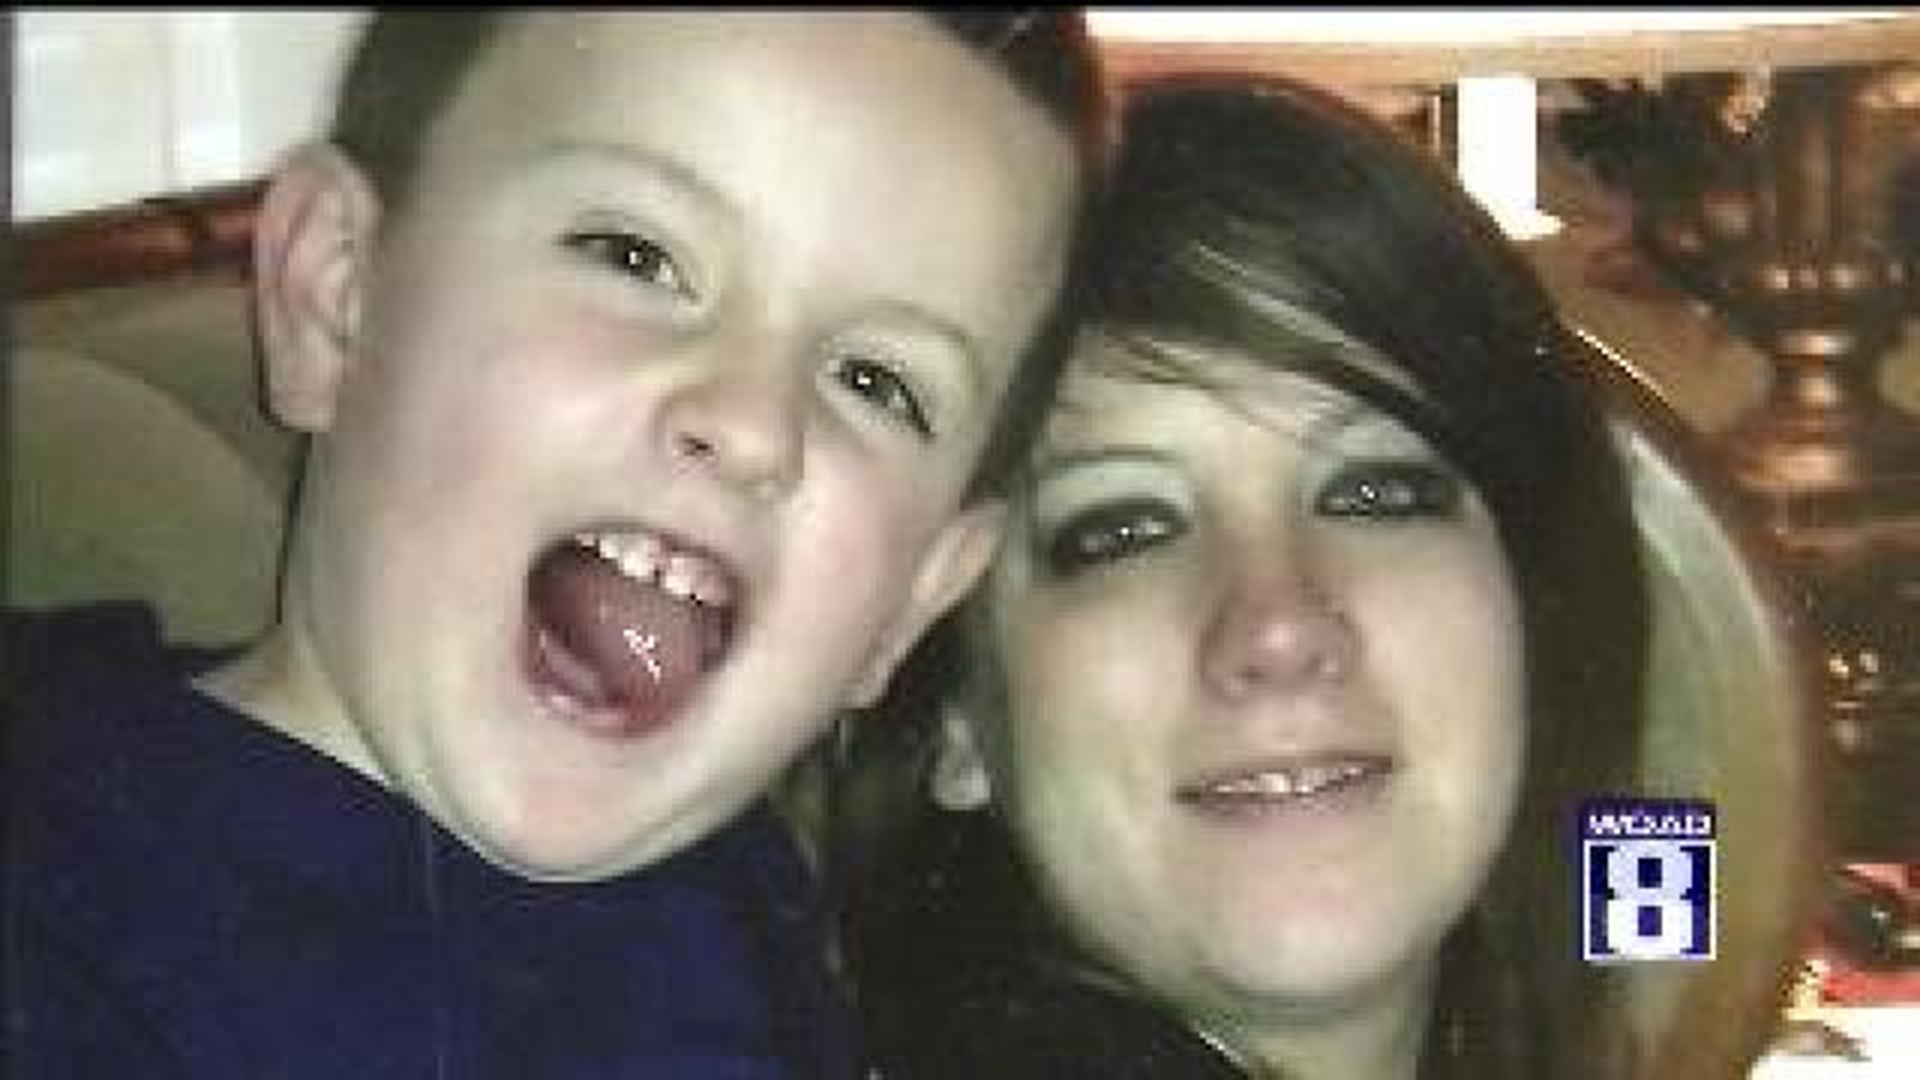 Mom wants justice for son killed in dog attack